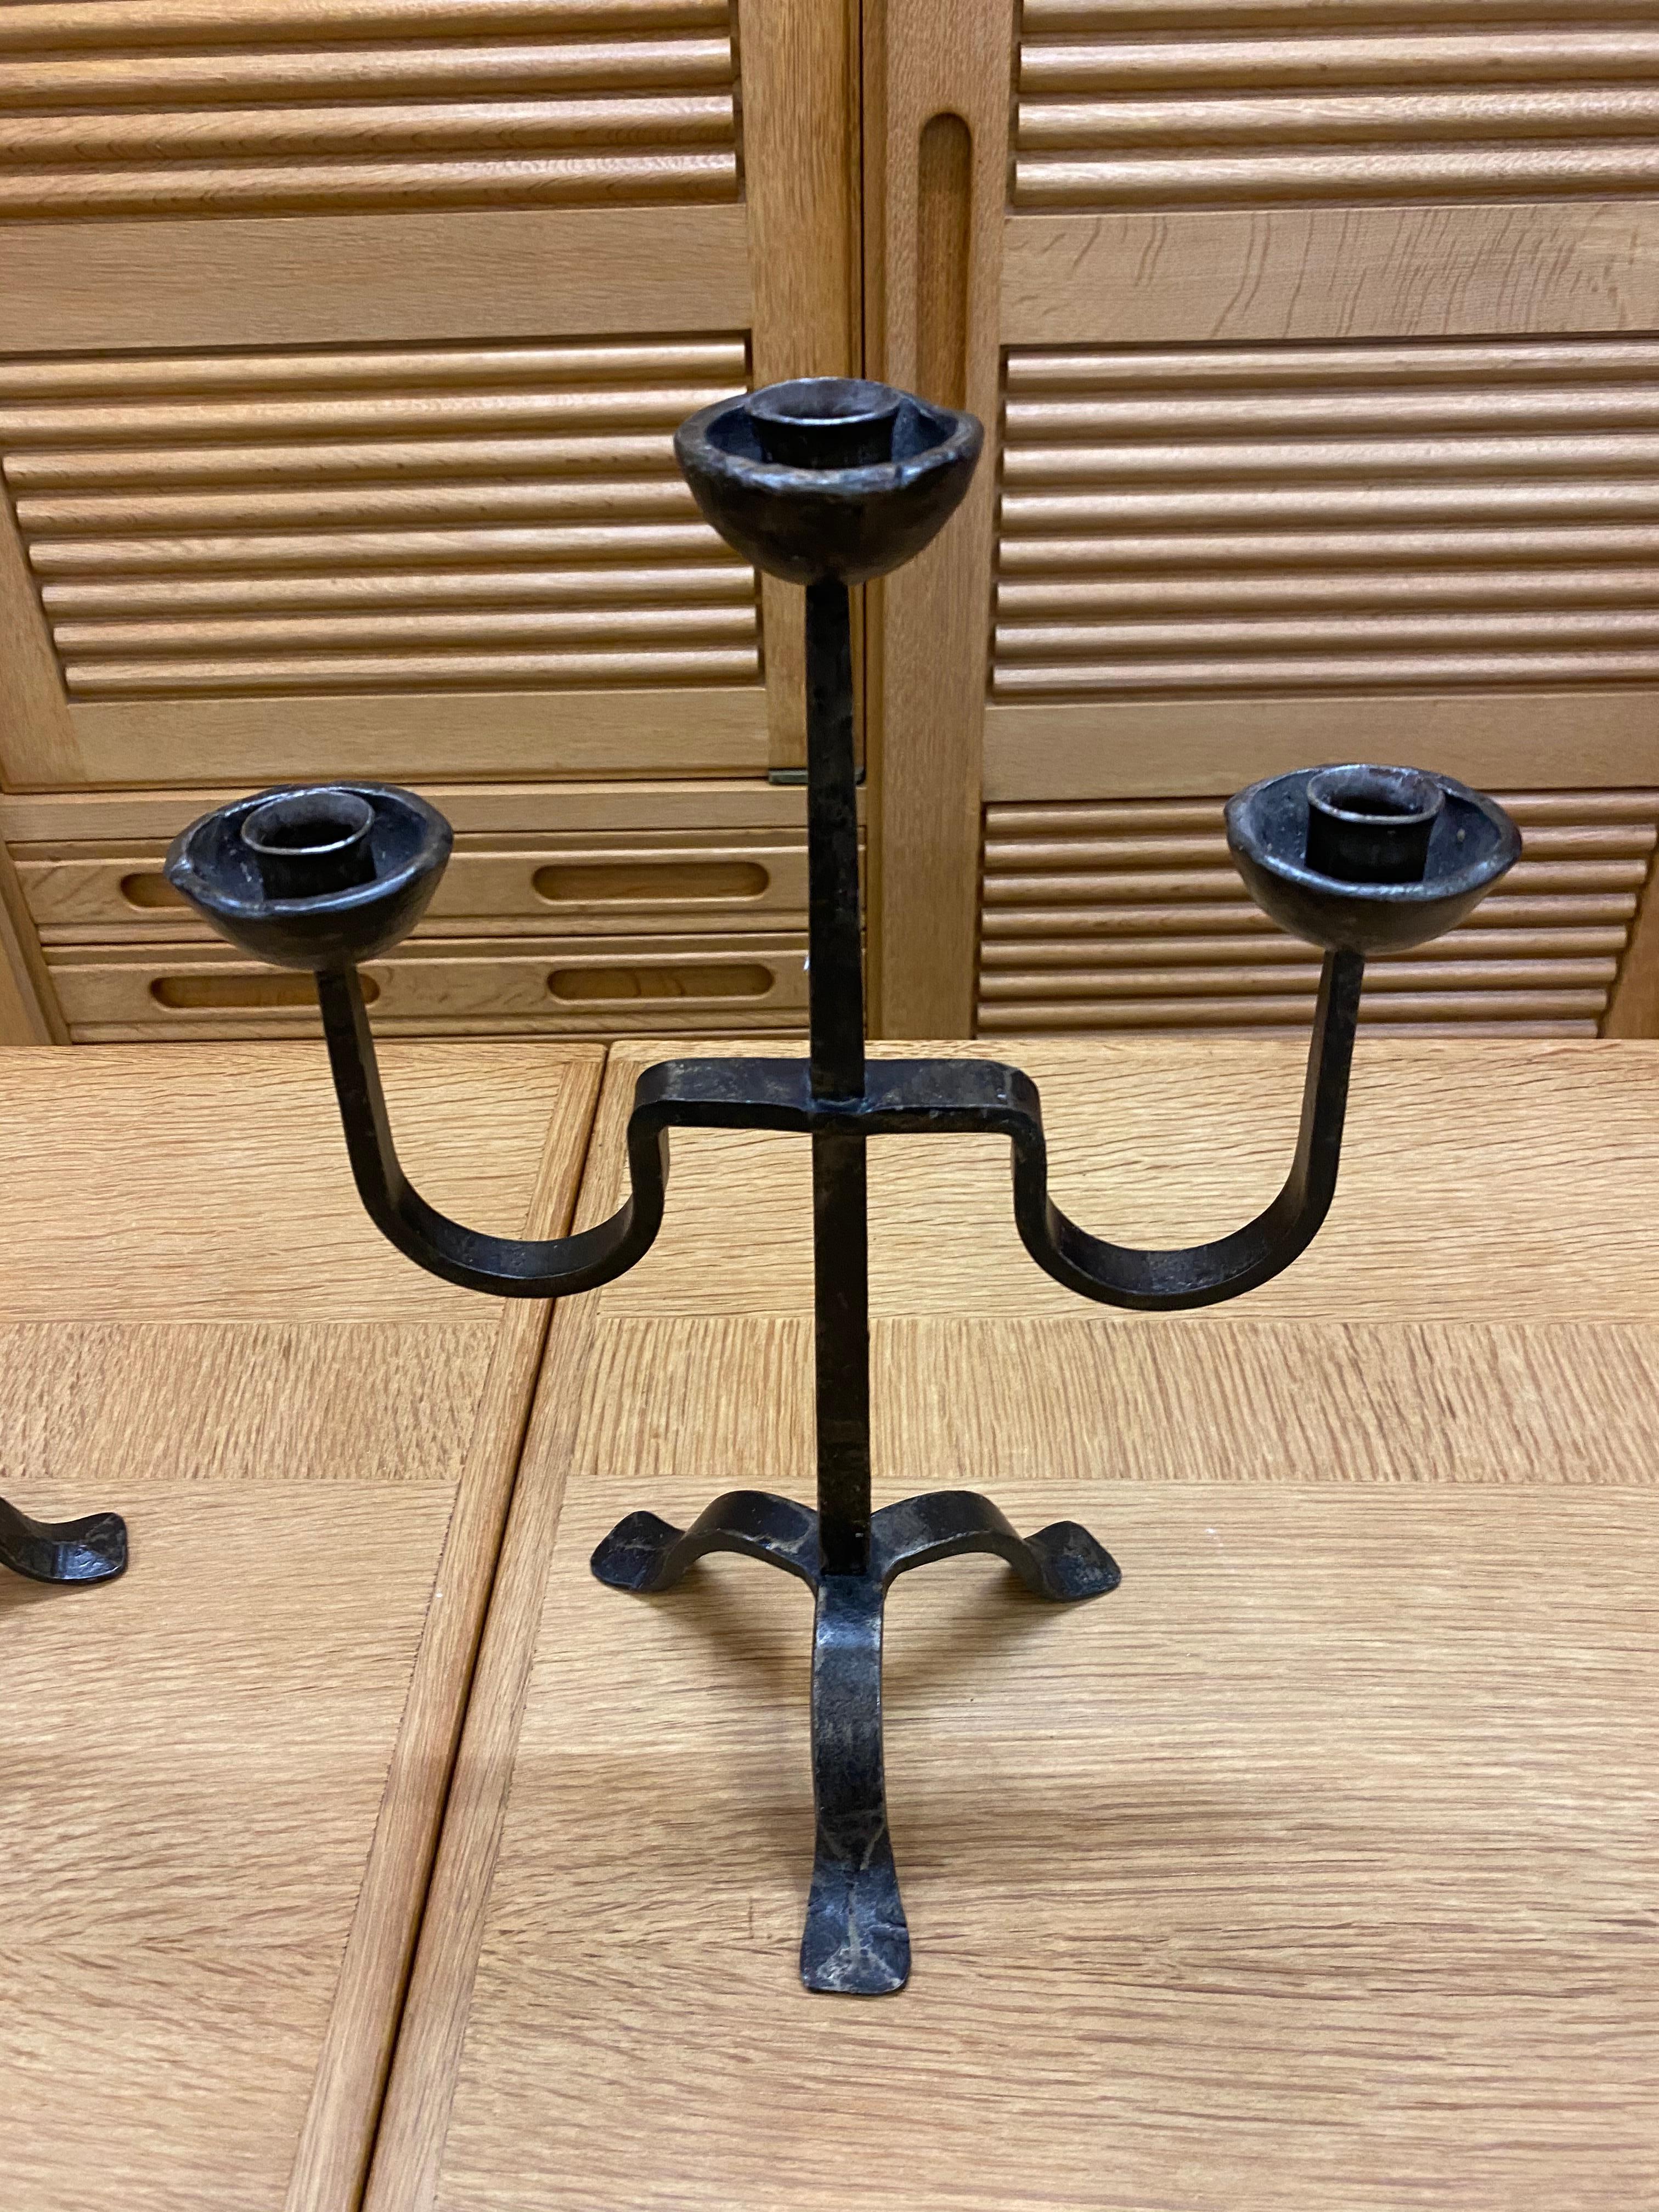 Pair of wrought iron candelabra, in the style of the Artisans of Marolles, circa 1950-1960
Designed for candles
Same model but 1 is 39 cm high and the other 40 cm.